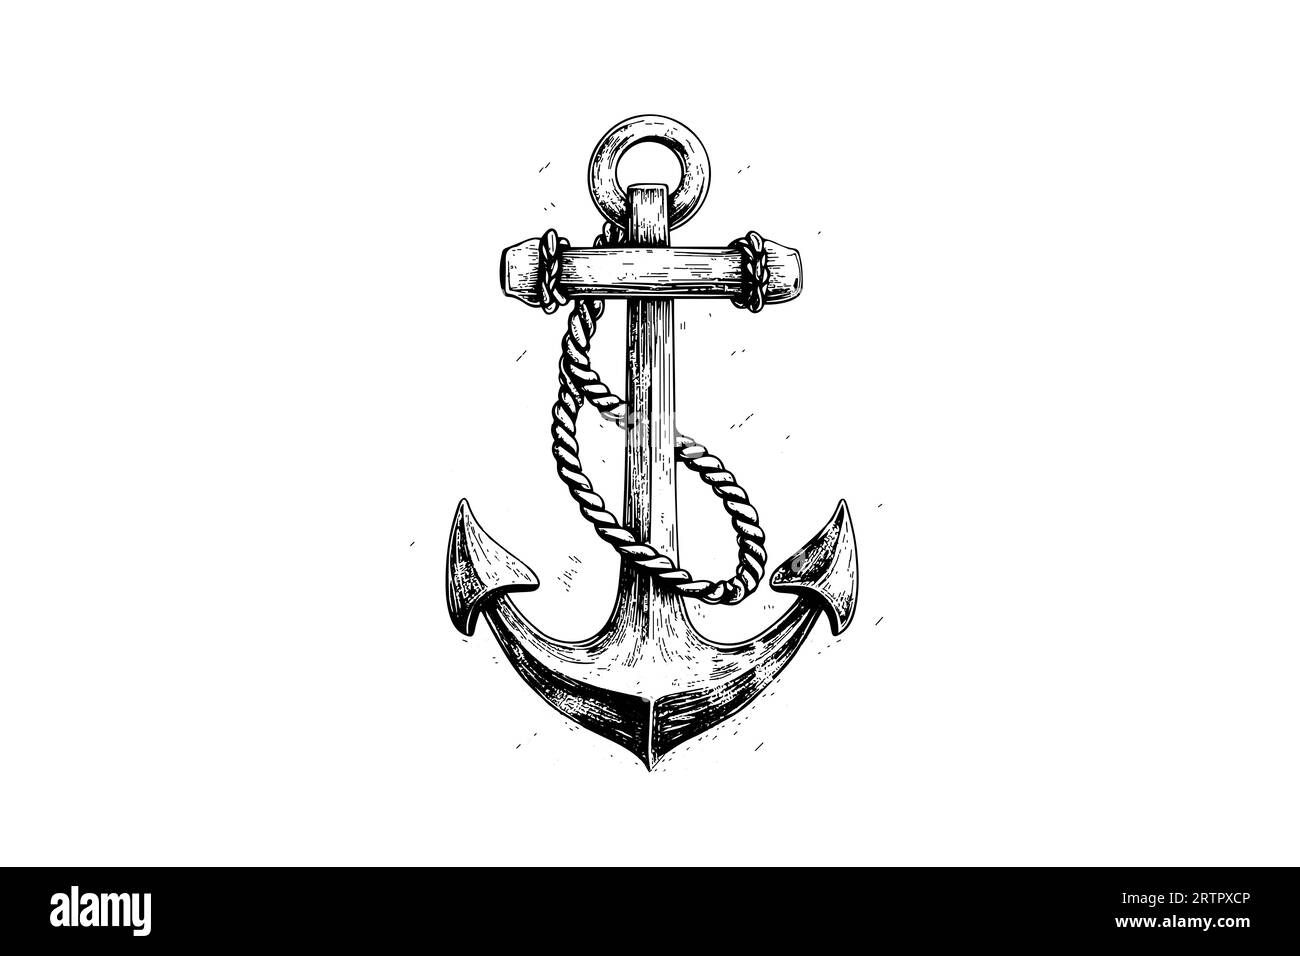 Anchor line Cut Out Stock Images & Pictures - Page 2 - Alamy